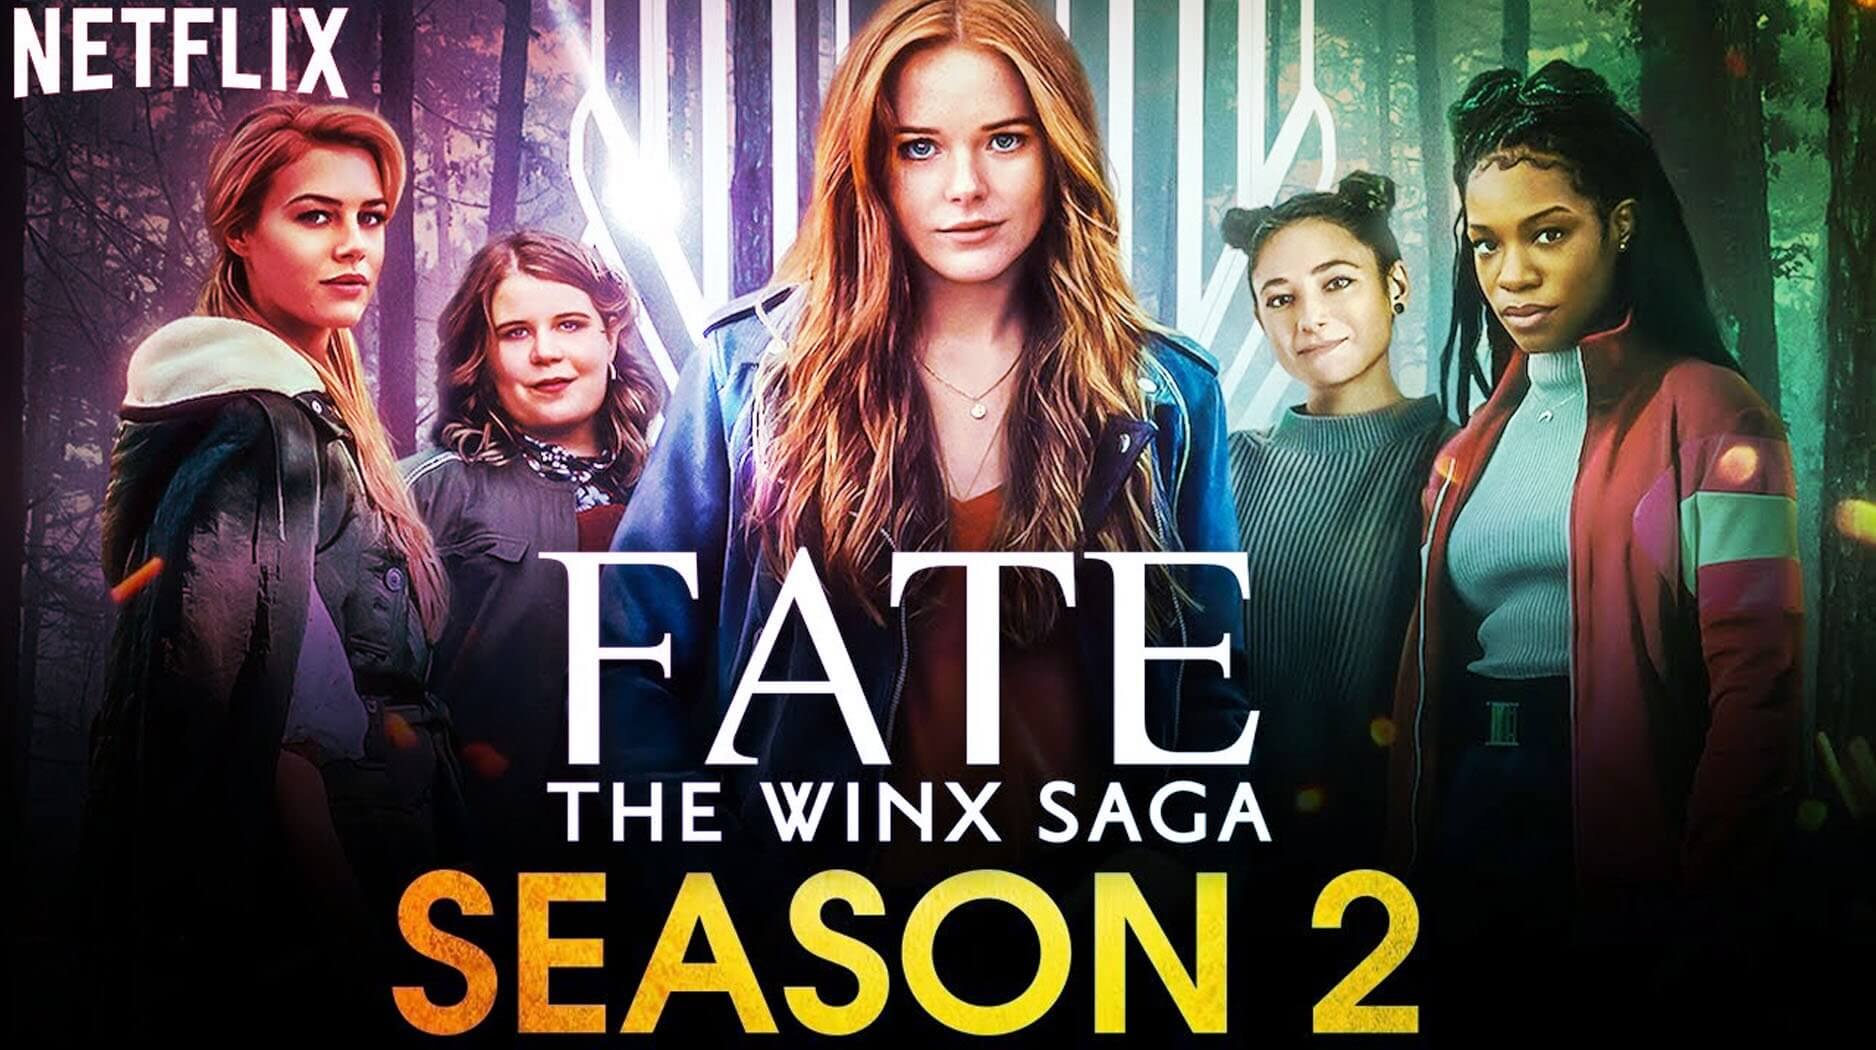 Who Will Be Part Of Fate: The Winx Saga season 2? (Cast and Character)